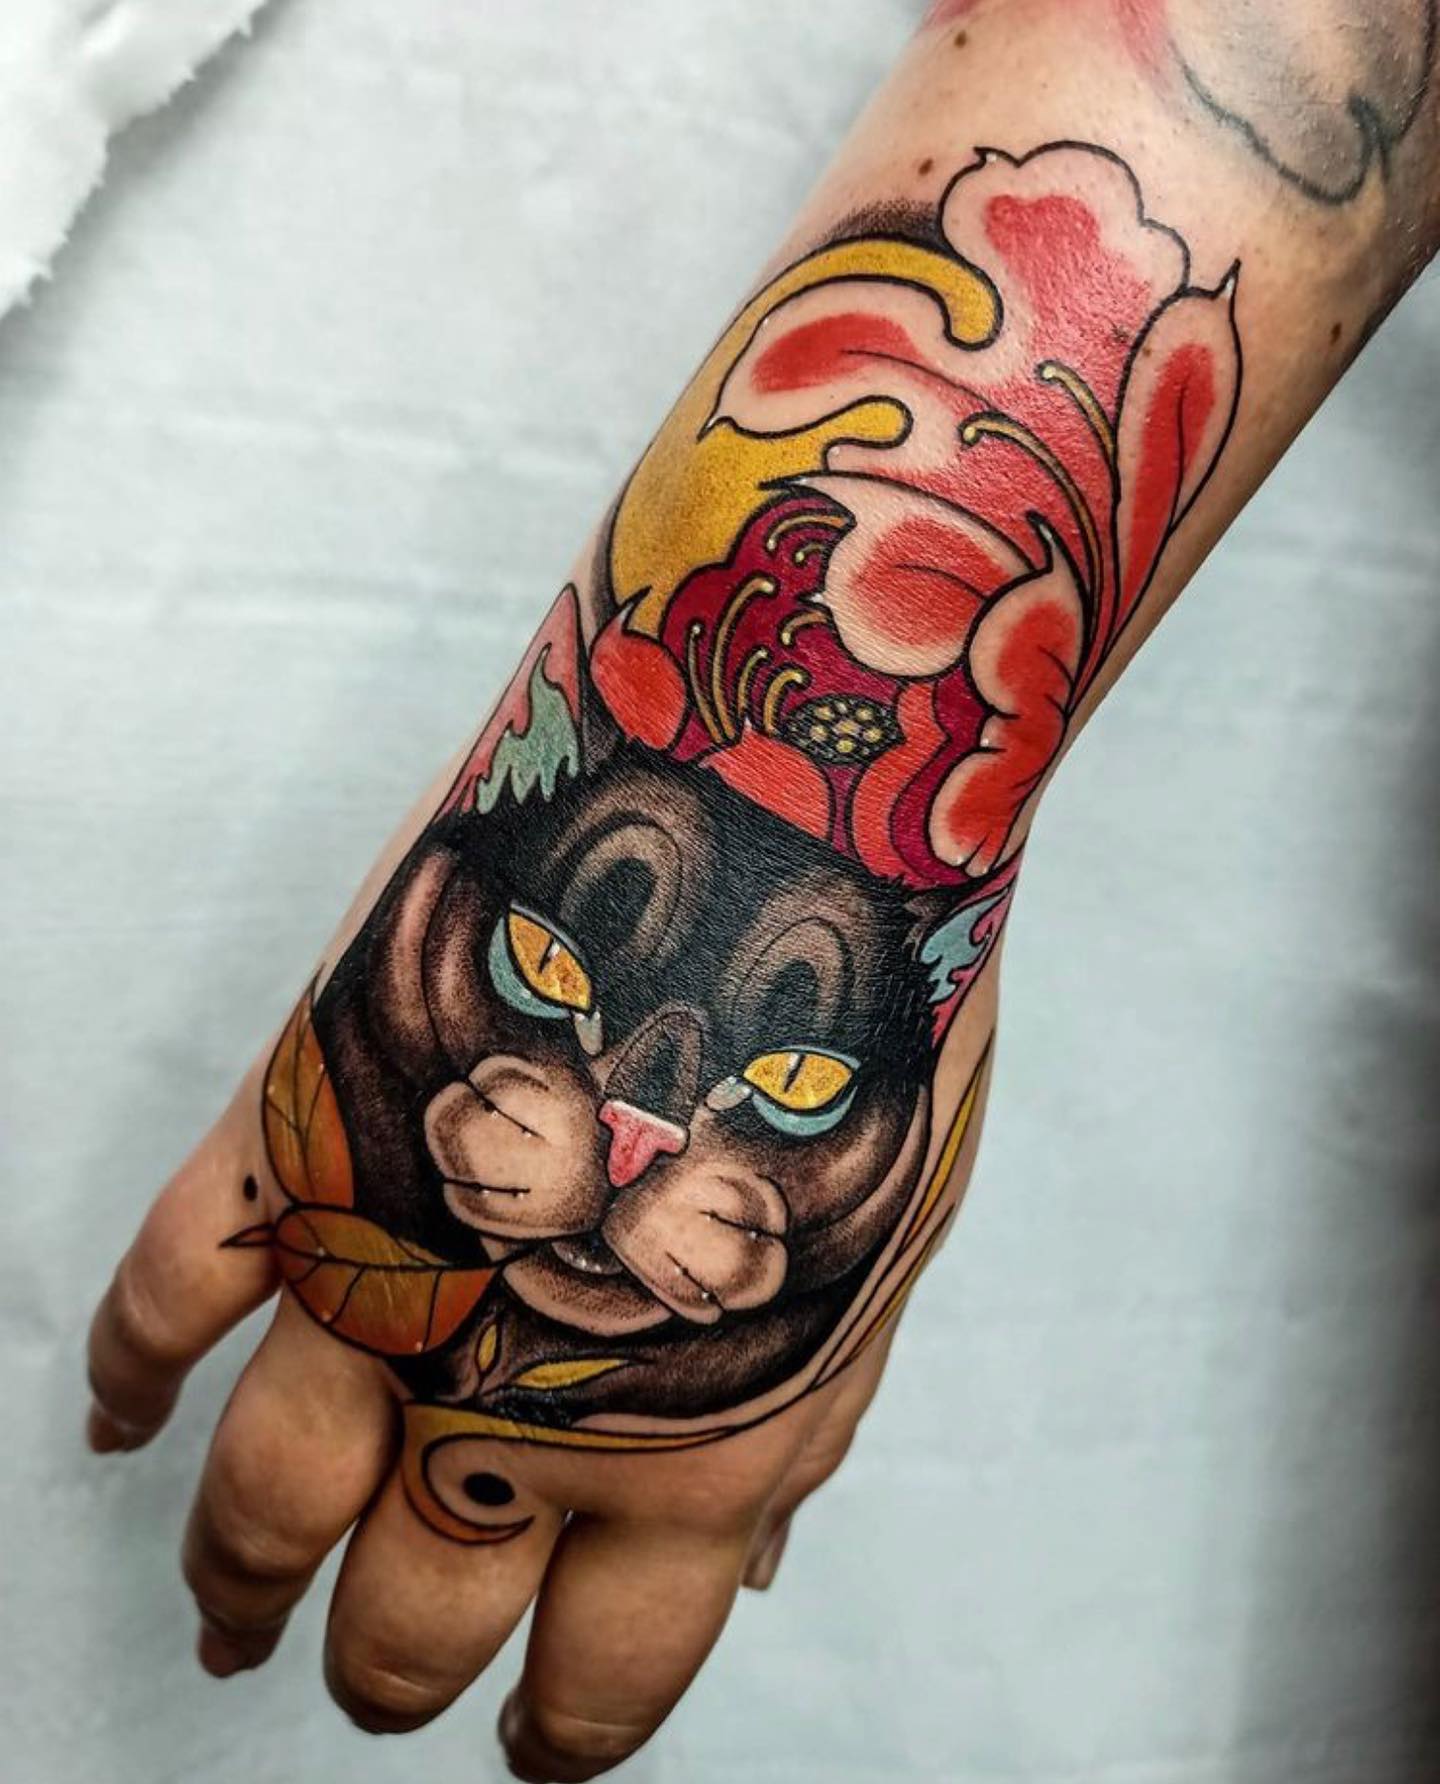 kalipsotattoo was in her element yesterday and absolutely smashed this portrait of Alana’s cat on her hand🐱She would love to do more things like this so if you’re a keen bean, fill in an enquiry form with reception or contact her directly 😘
•
Link to enquiry form: https://studioxiii.tattoo/tattoo-enquiry/
•
             